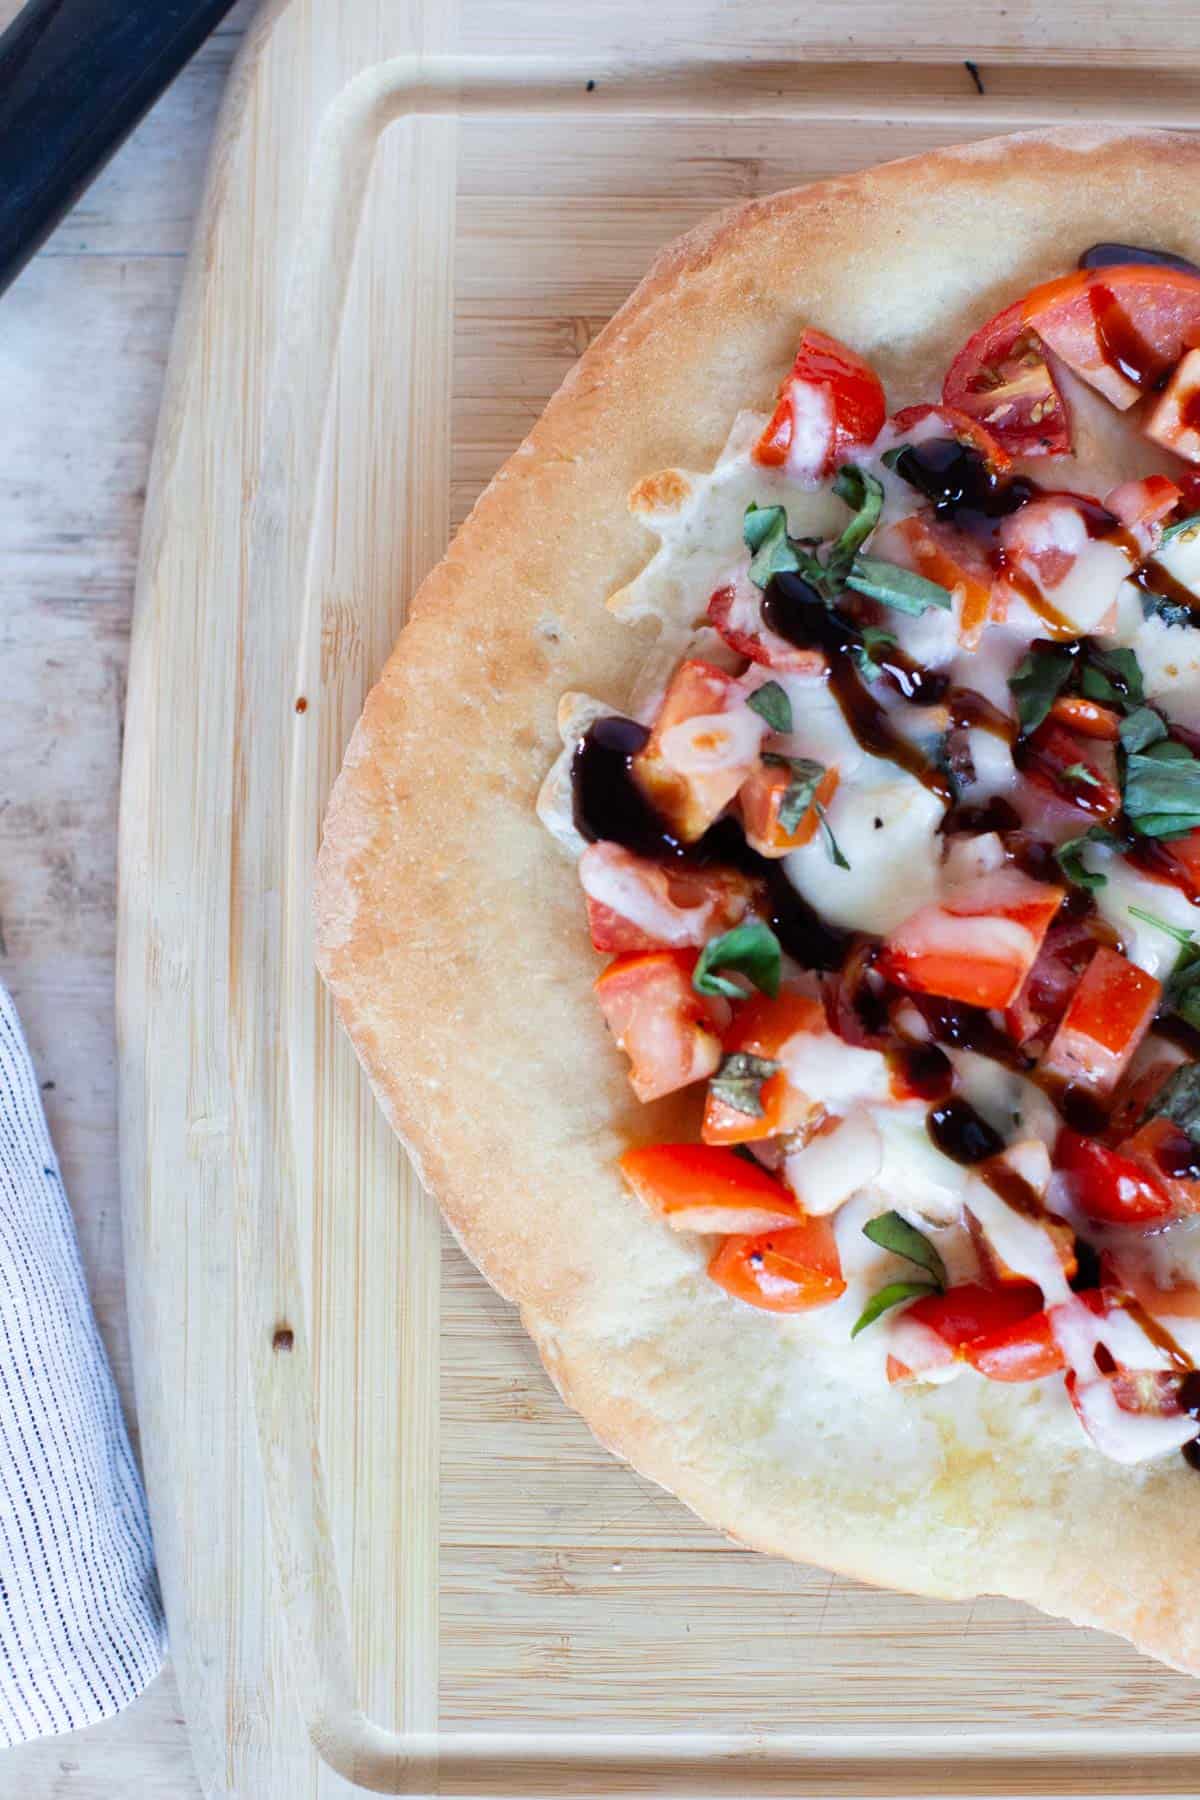 Thin crust pizza dough with bruschetta toppings and balsamic drizzle.